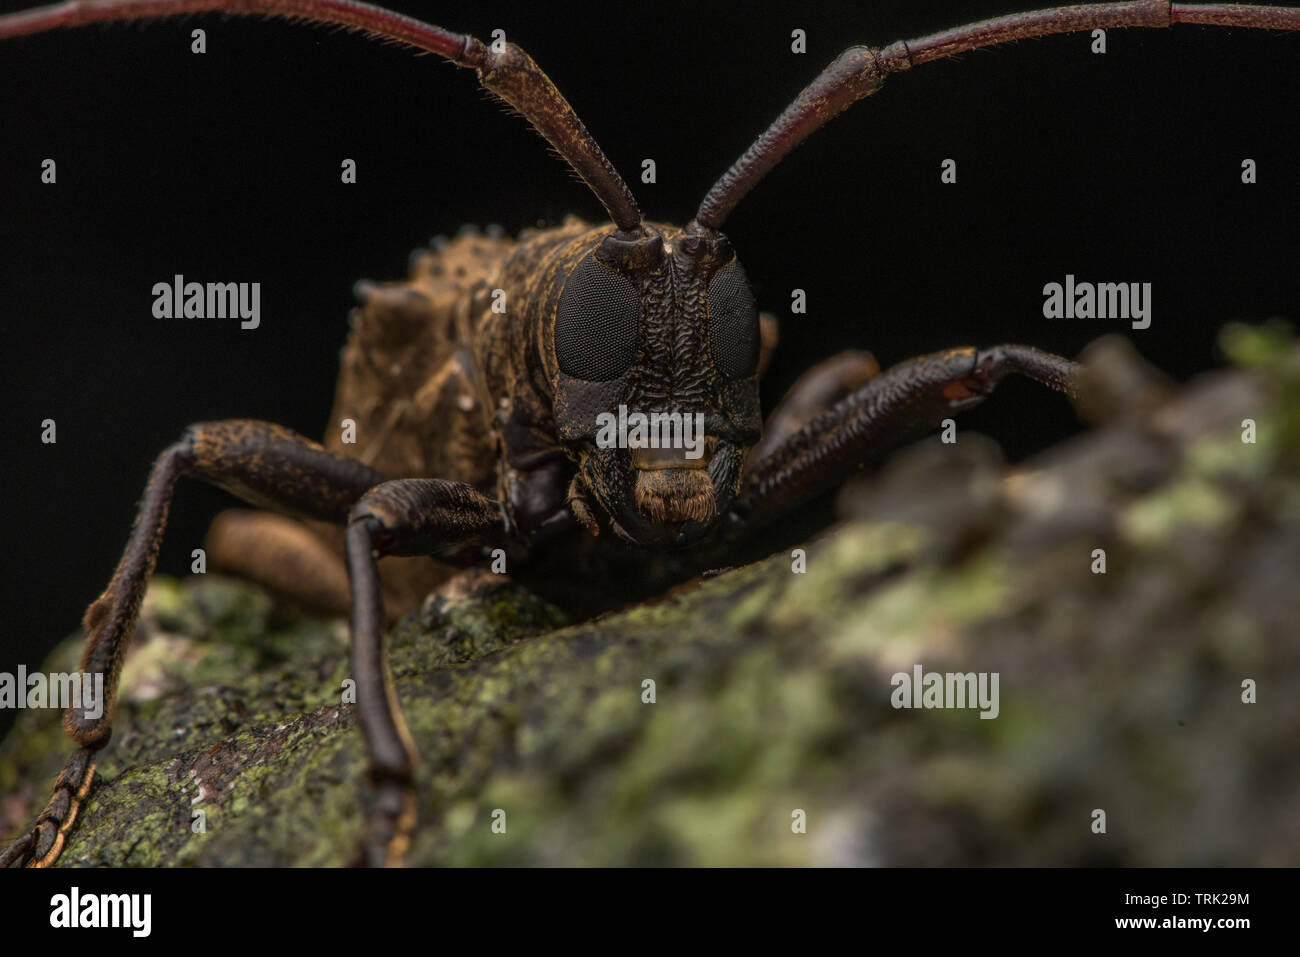 A longhorn beetle from the Cerambycidae family found in Yasuni national park in the Amazon rainforest of Ecuador. Stock Photo